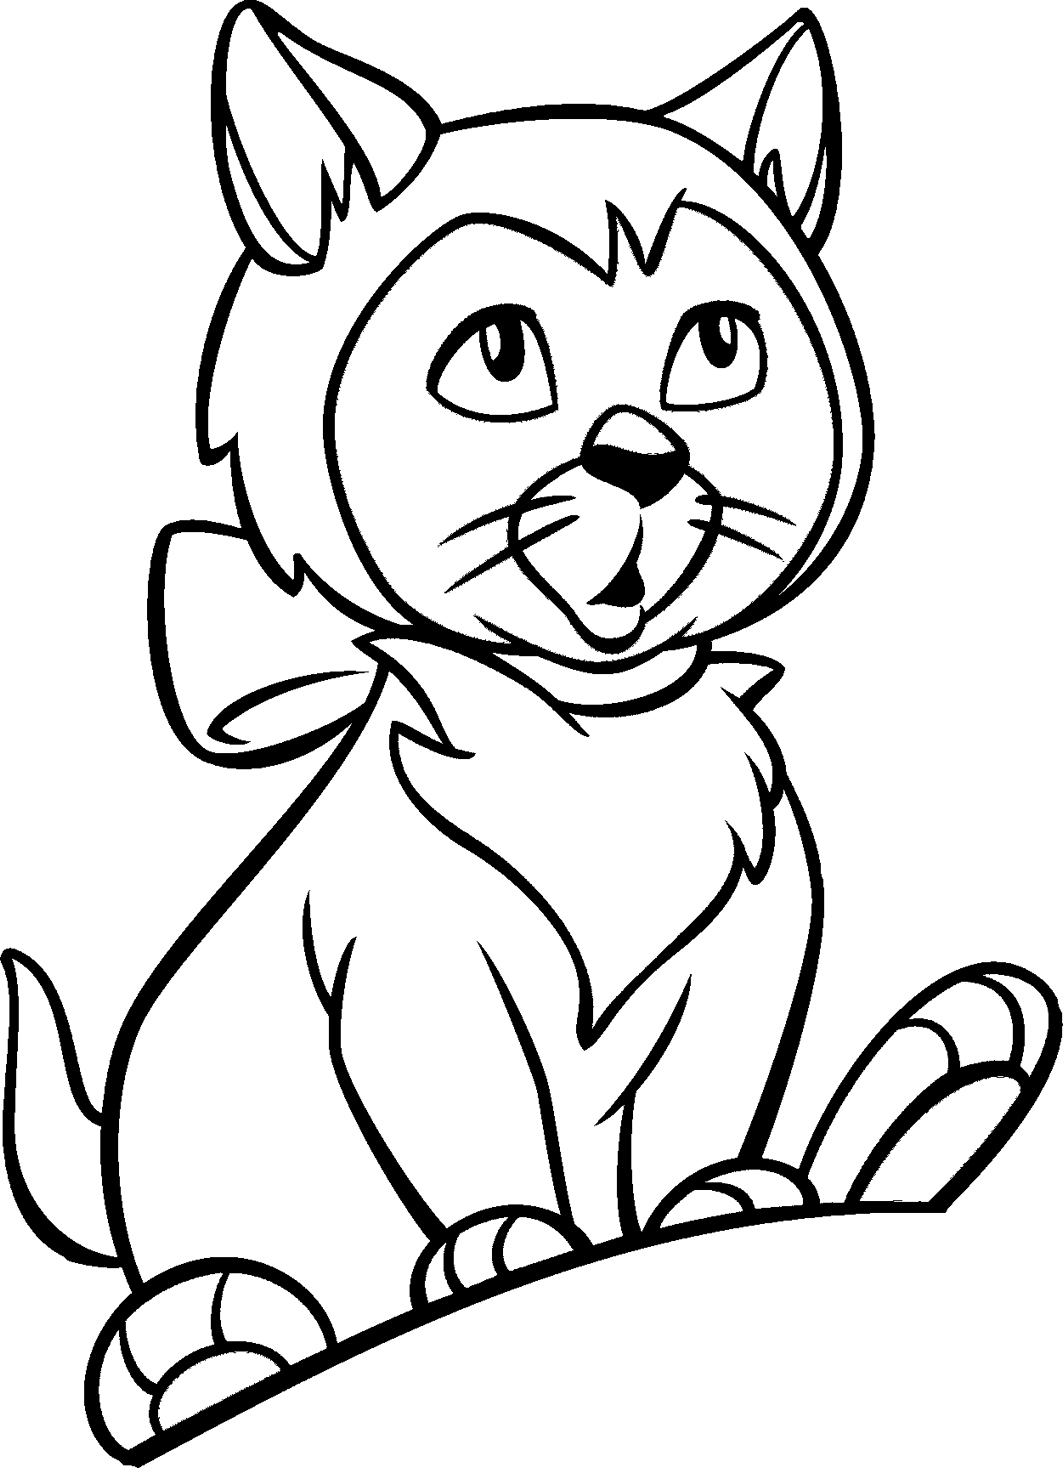 coloring book cat free printable cat coloring pages for kids cool2bkids cat coloring book 